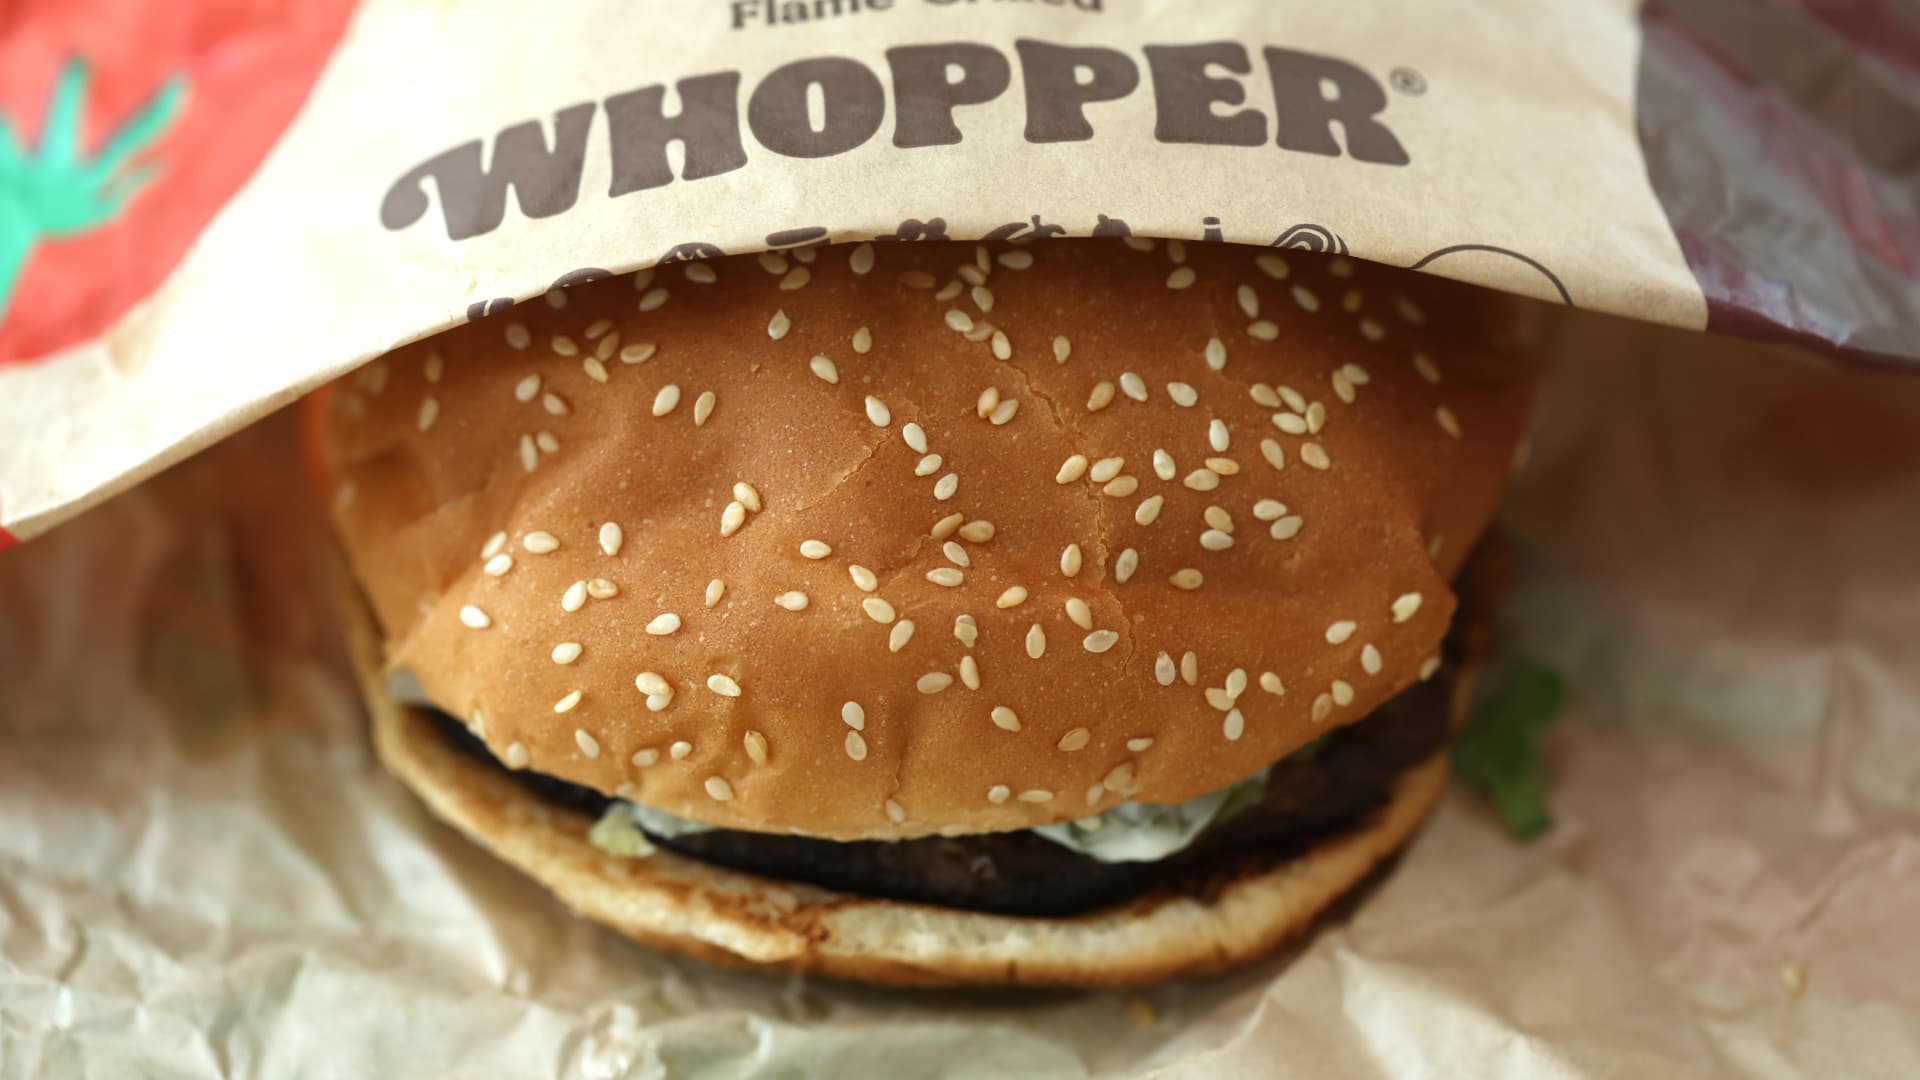 burger-king-is-selling-more-whoppers-than-ever-before-in-early-days-of-its-us.-turnaround